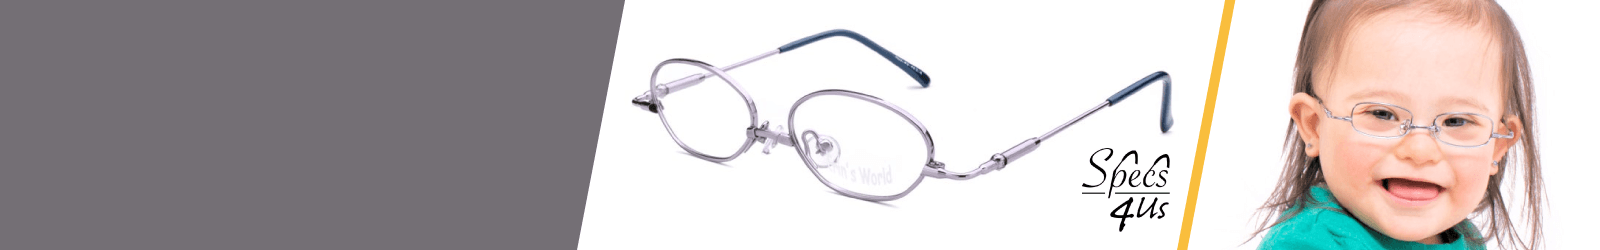 White Specs4us Eyewear for Kids from 4 to 6-year-old